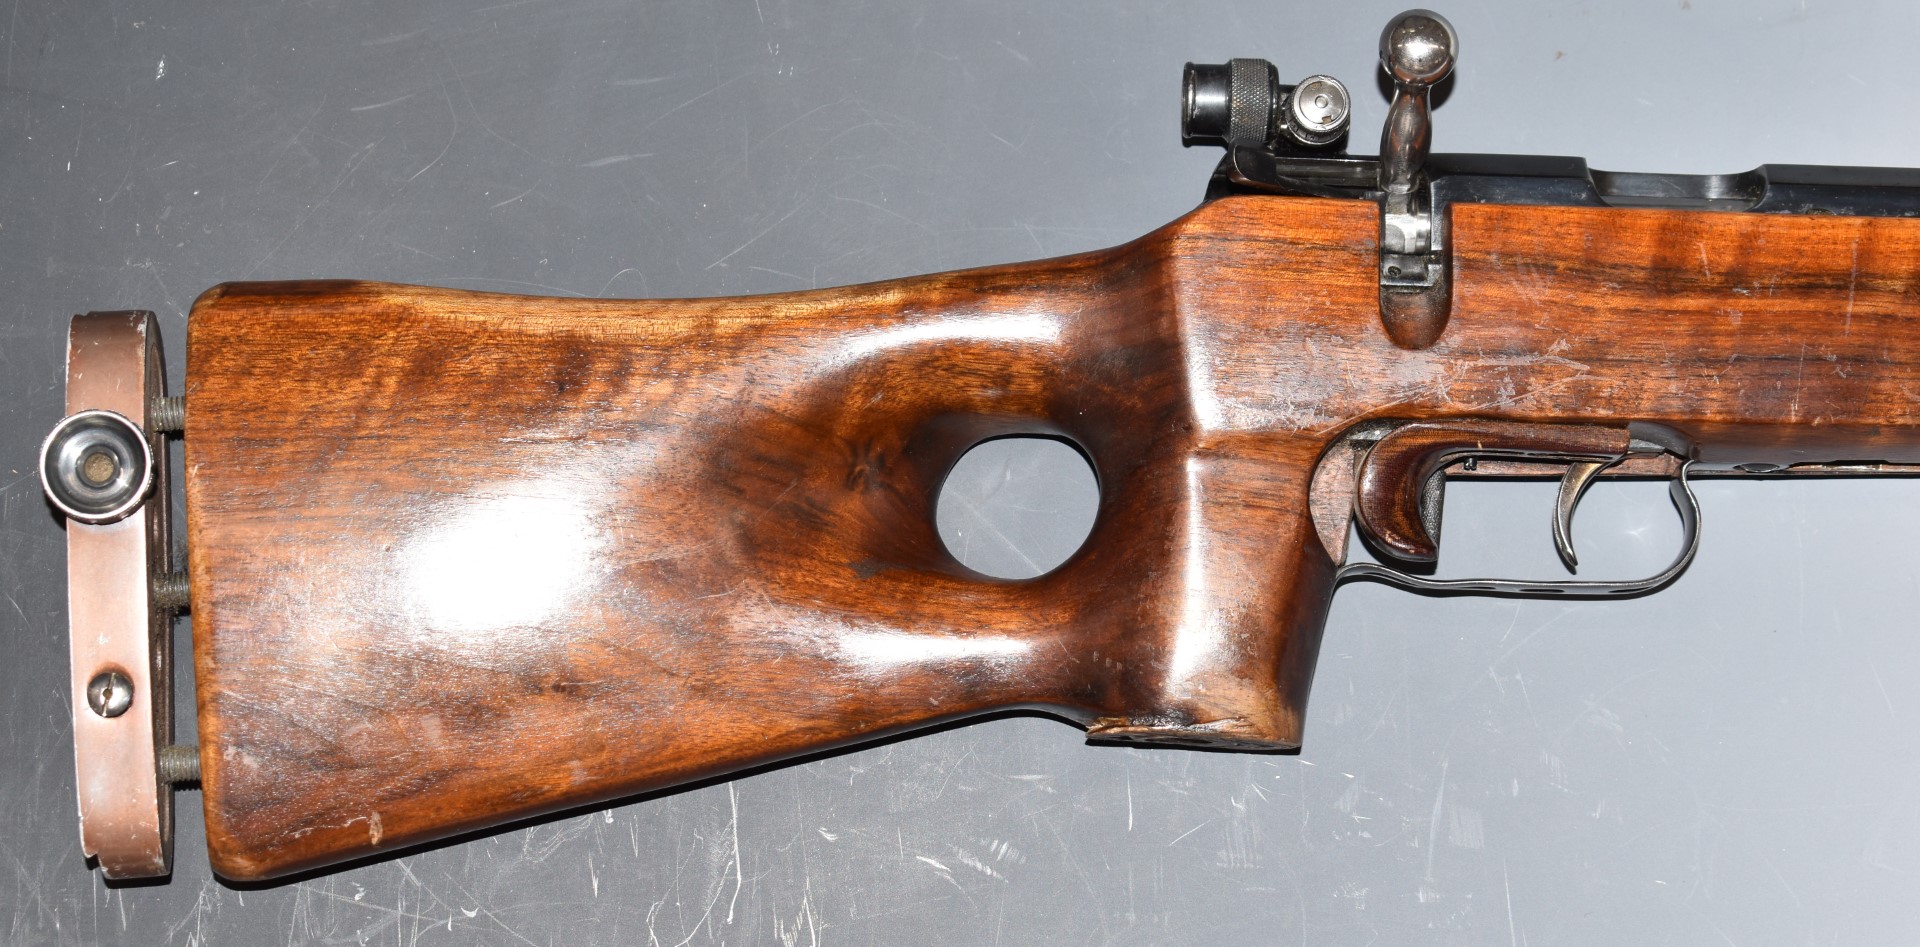 Vostok MU-12 .22 bolt-action target rifle with thumb hole grip, chequered forend, raised cheek - Image 3 of 15